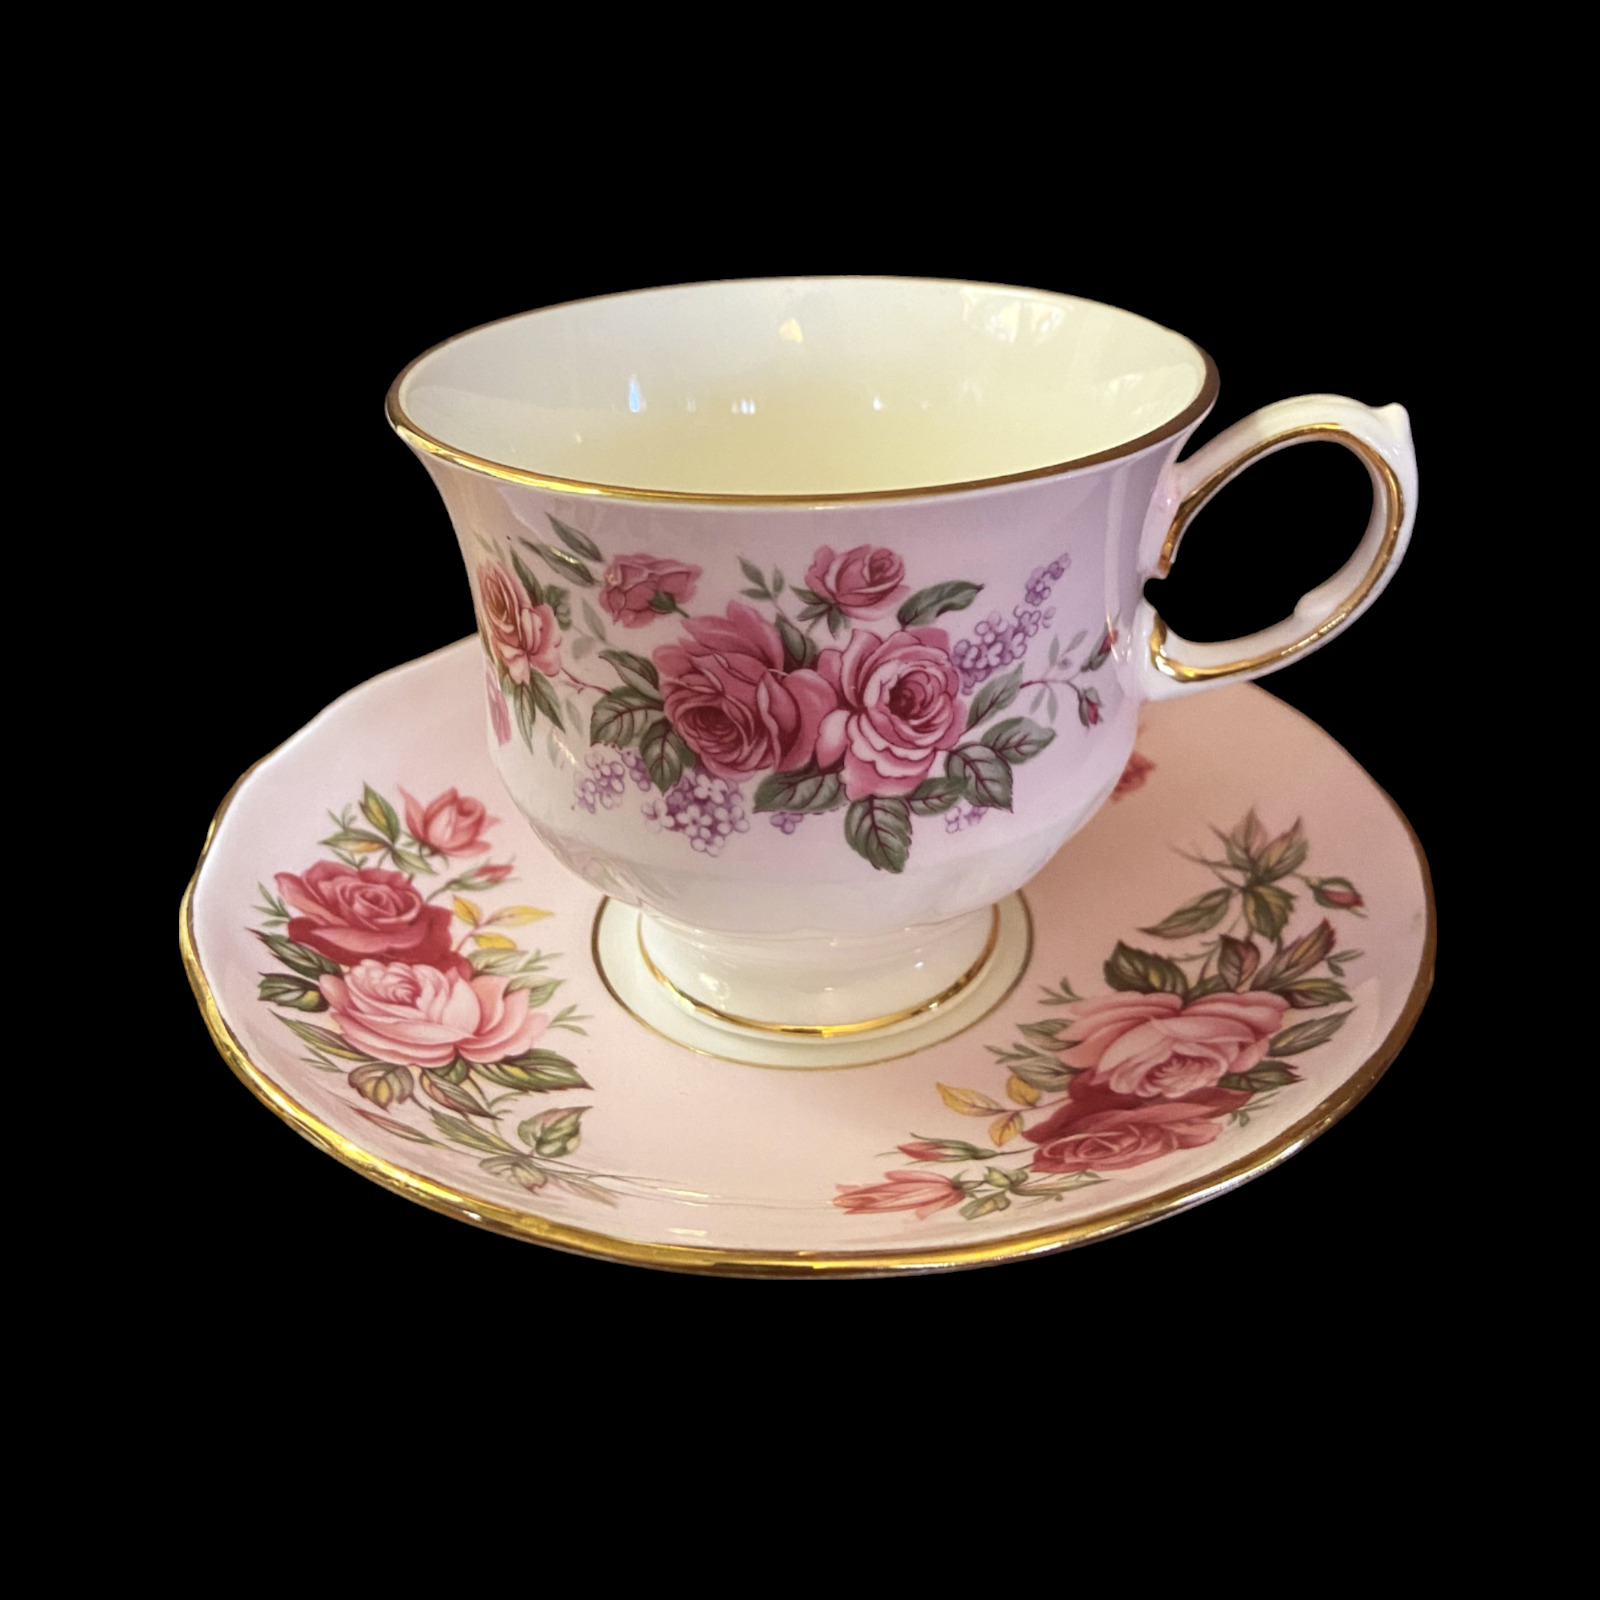 Queen Anne Bone China Teacup & Saucer Pink Roses Ridgway Potteries England